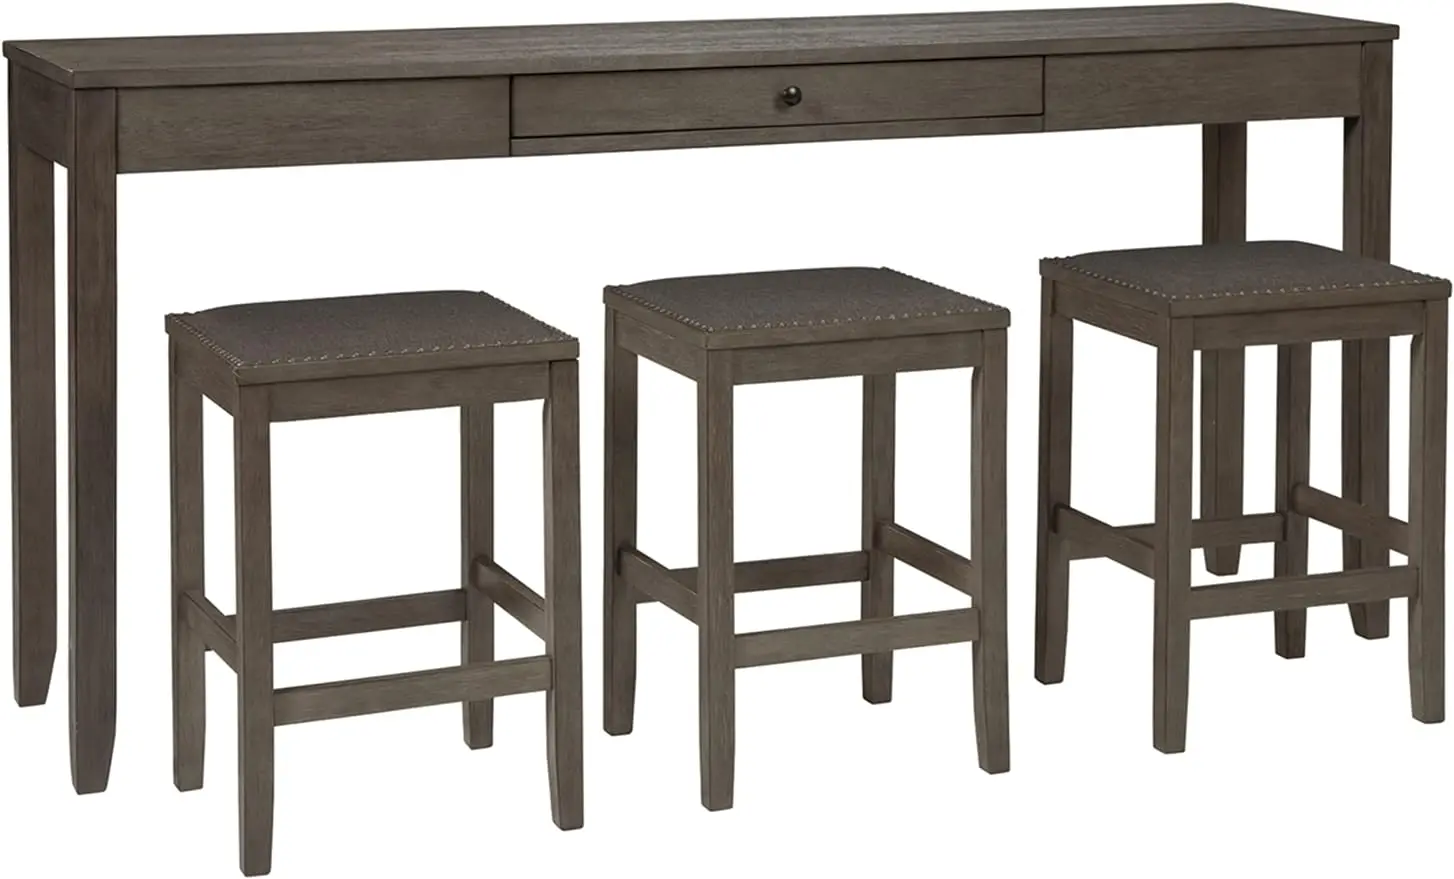 

Signature Design by Ashley Rokane Urban Farmhouse Counter Height Dining Room Table Set with 3 Bar Stools, Brown